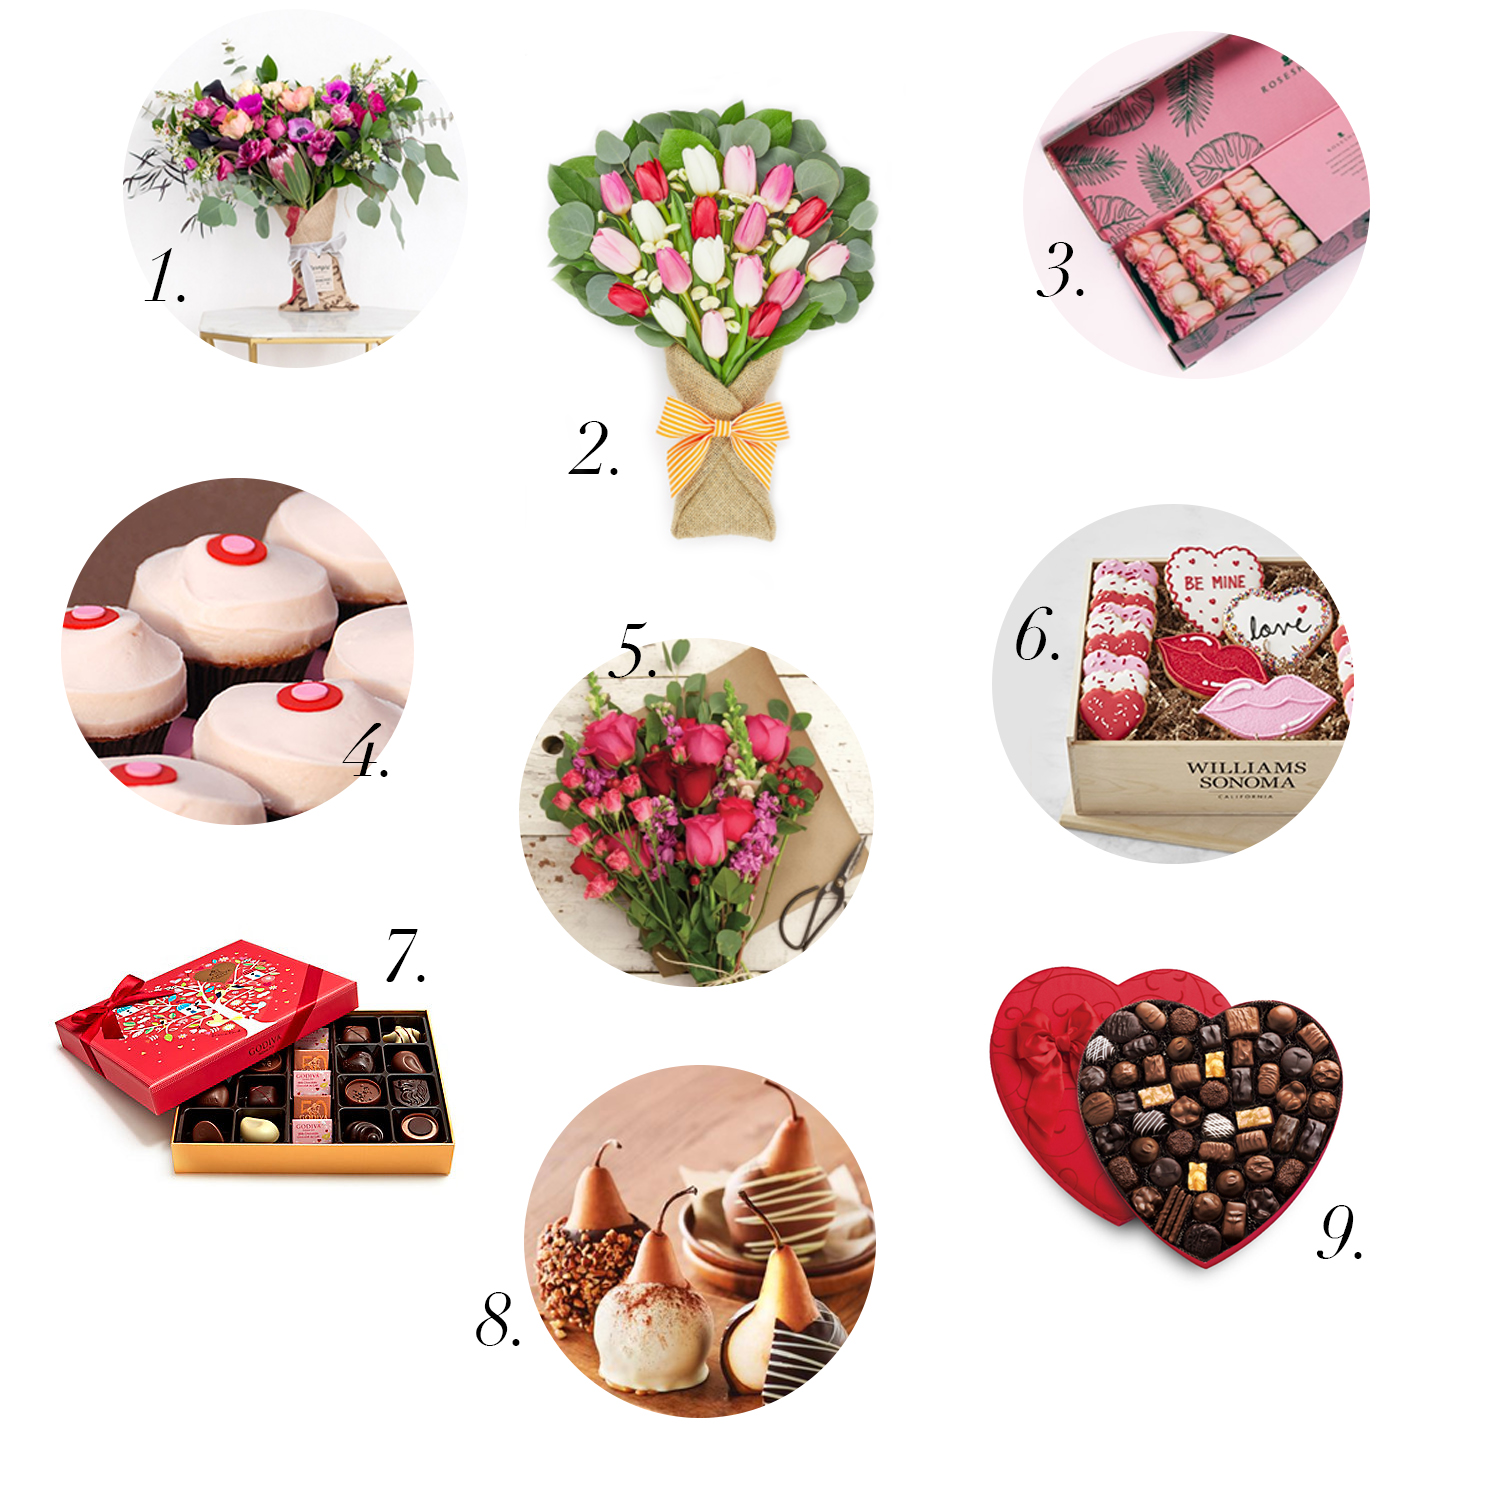 Valentine's Day Gift Ideas for the Last Minute Shopper. Catch my absolute favorite ideas if you are a fellow procrastinator like me - wink! All over on the Haus of Layne blog! #ValentinesDay #GiftIdeas